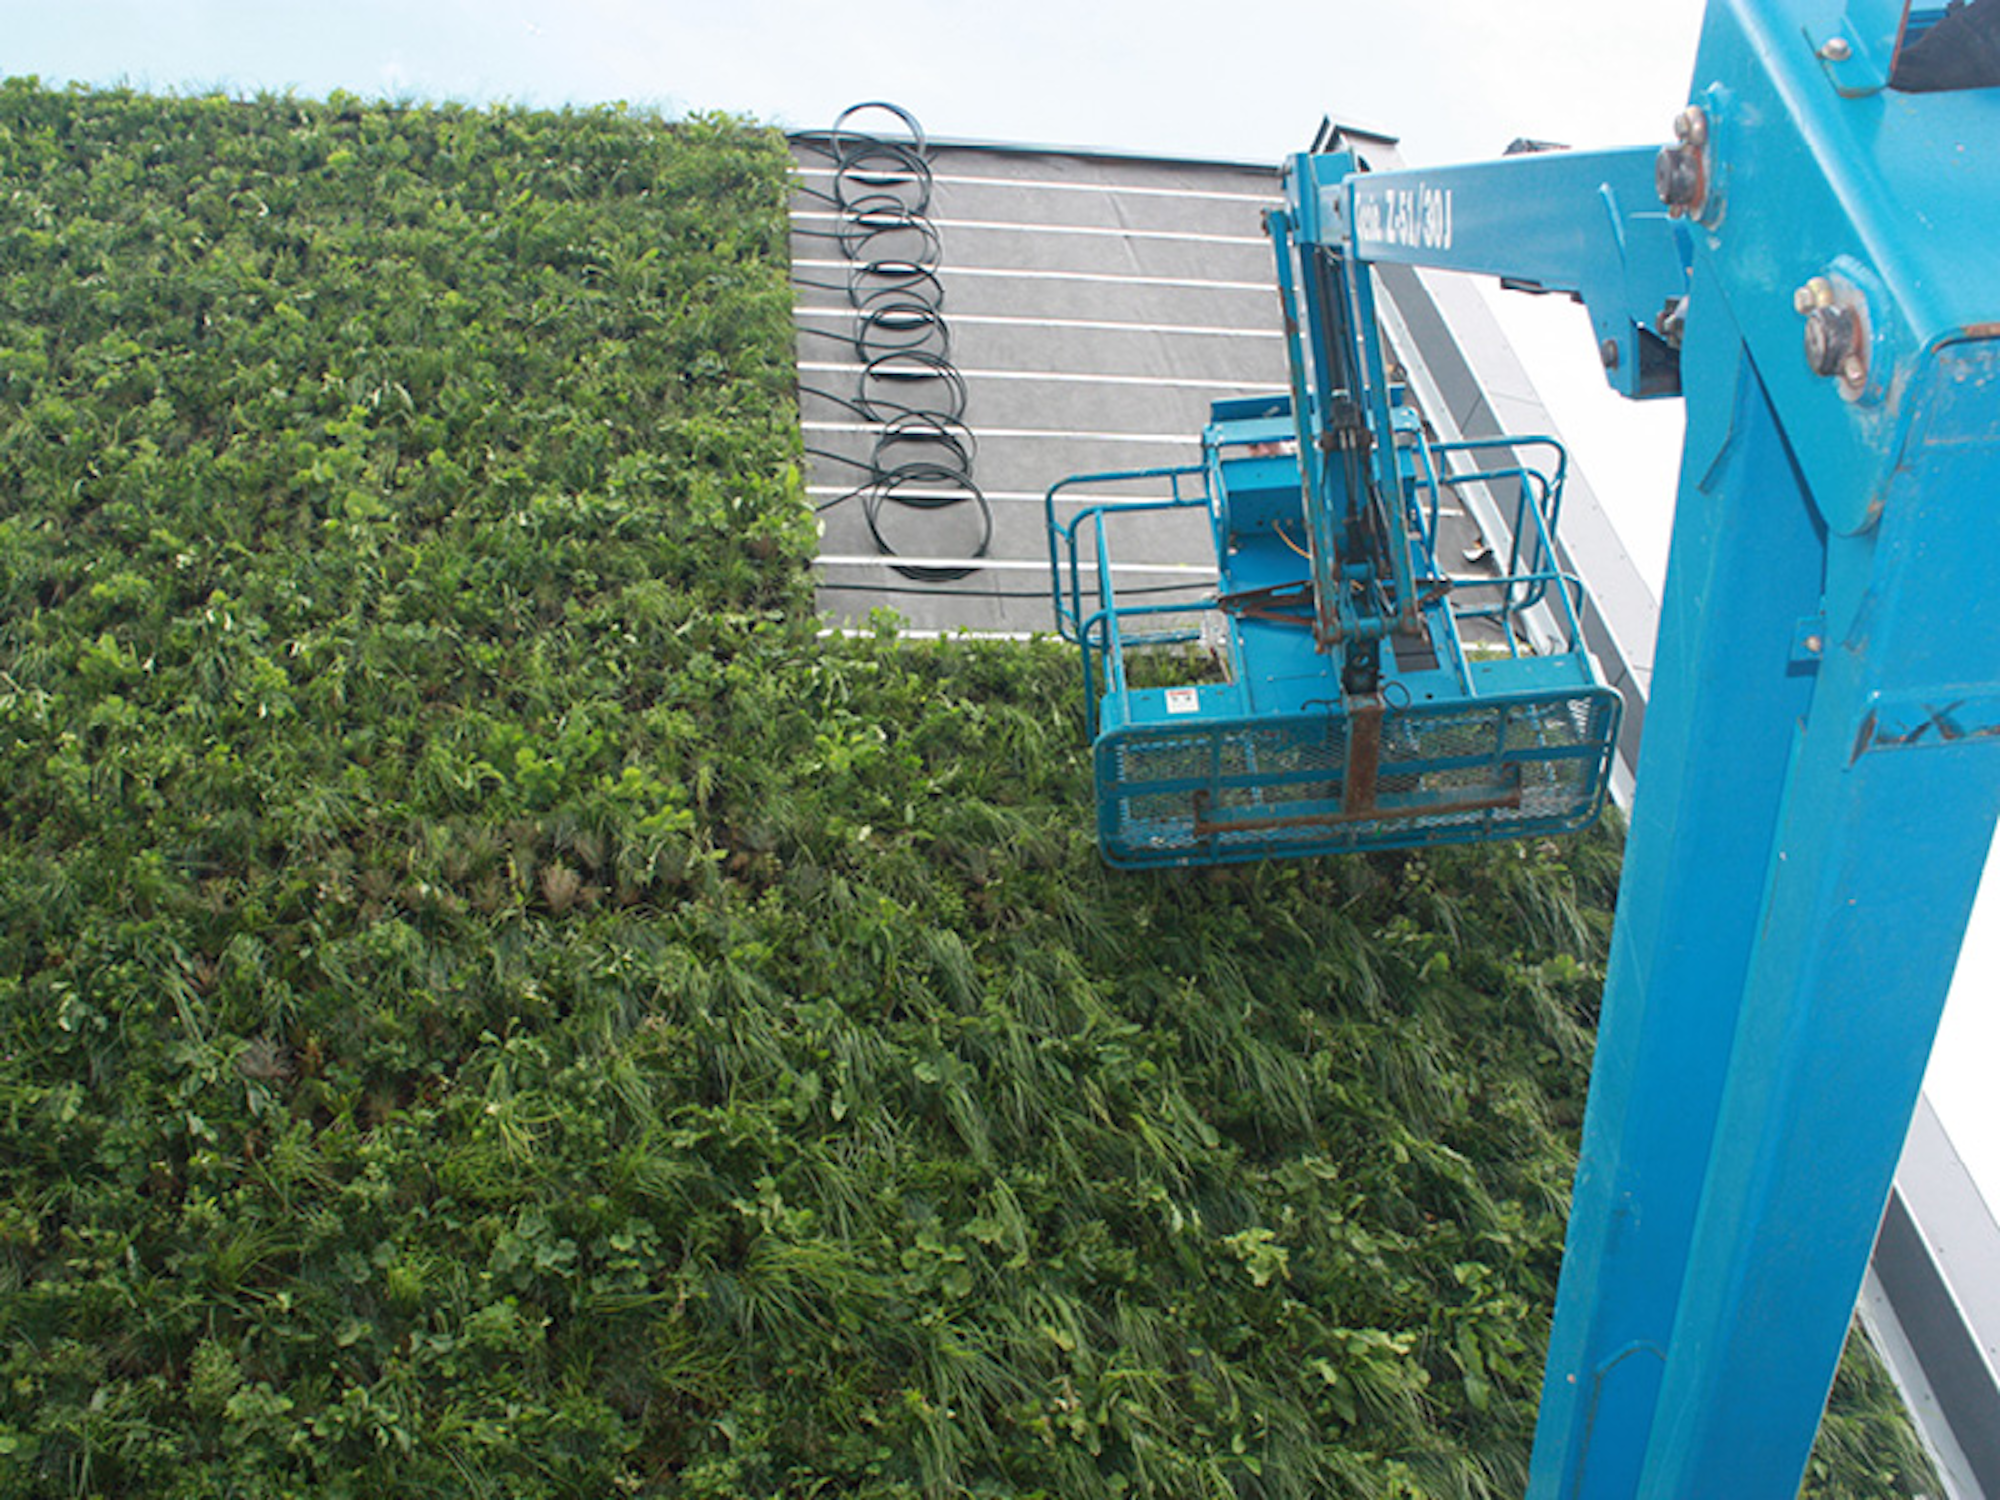 installing the living green wall on the side of a large commercial building